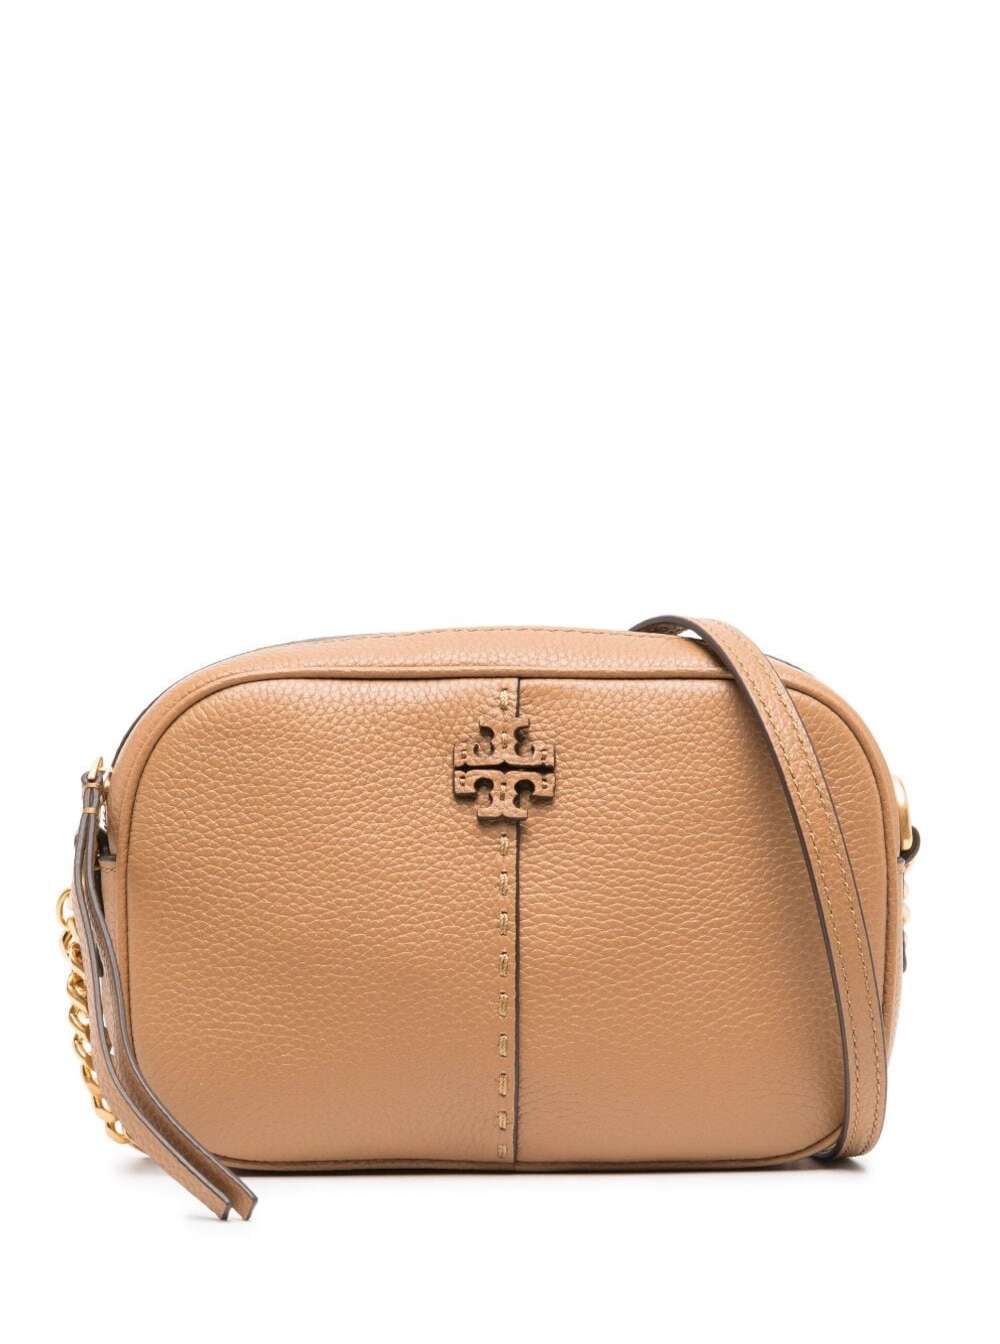 Tory Burch Mcgraw Beige Crossbody Bag With Double T Detail In Grained Leather Woman In Brown